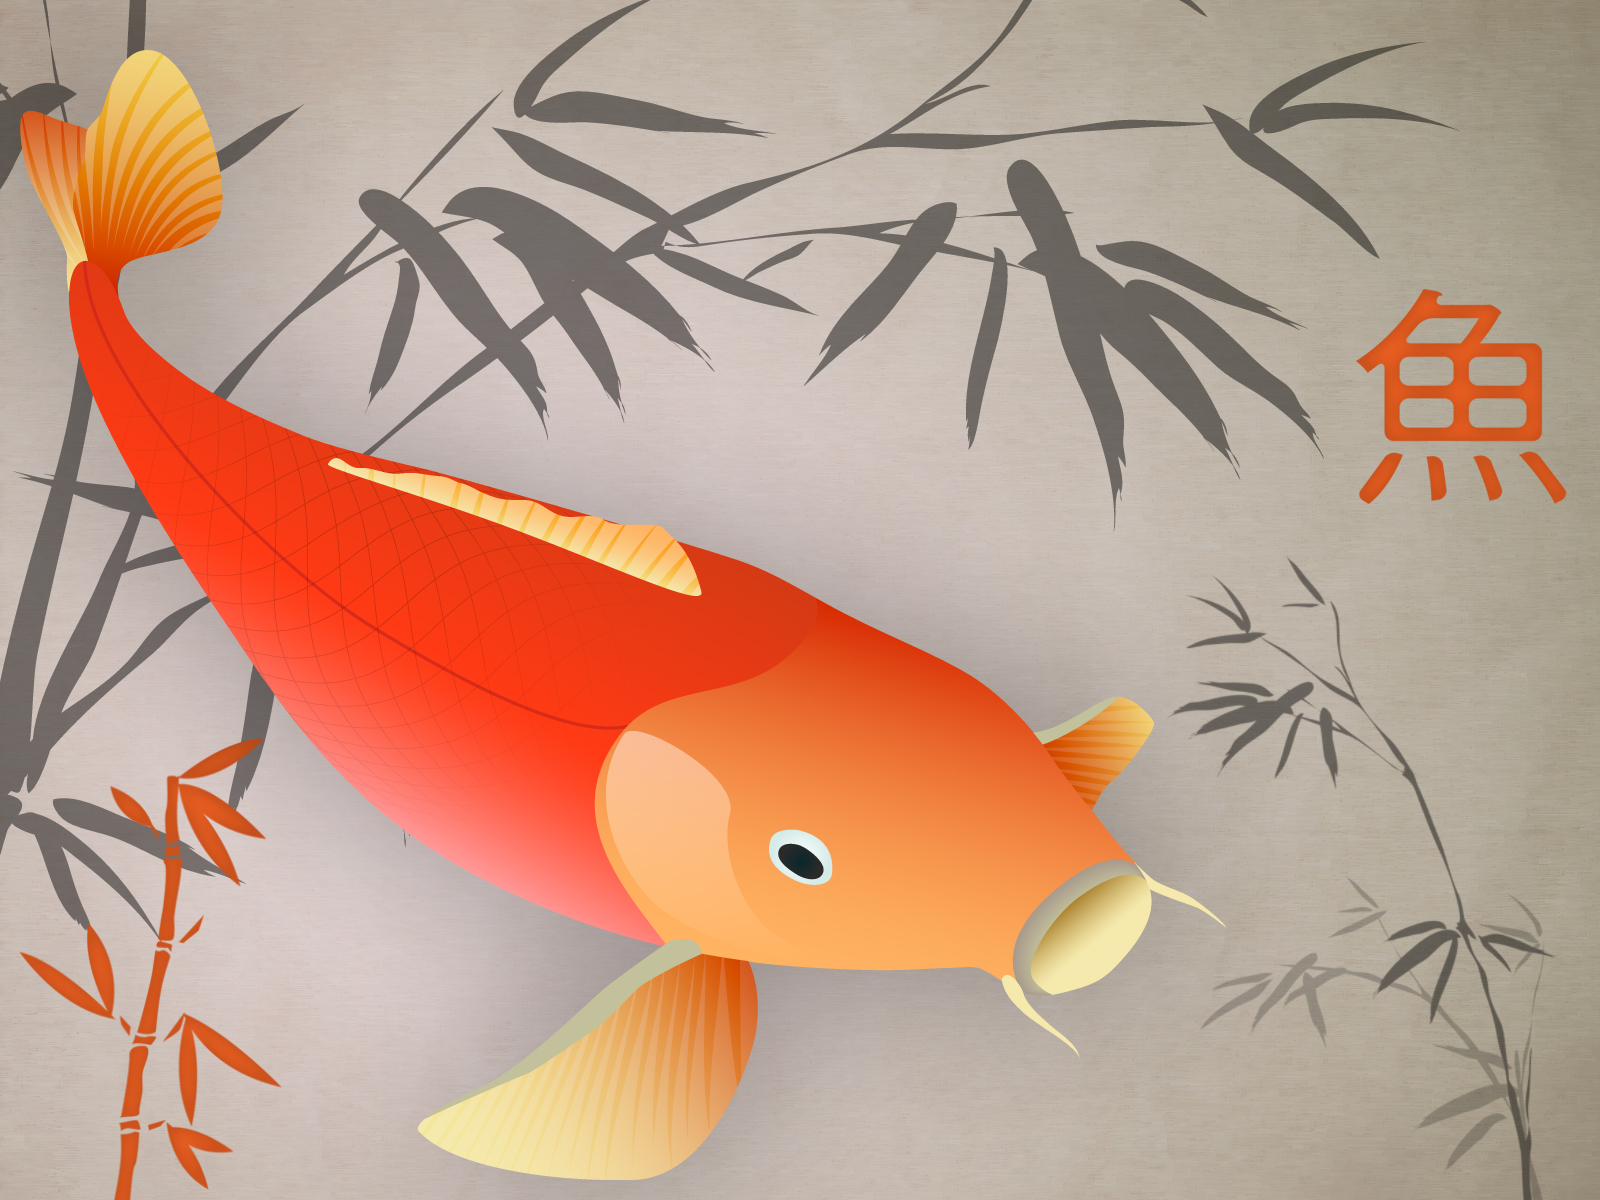 ... use his sketches to create some new vector graphics. This Koi fish is